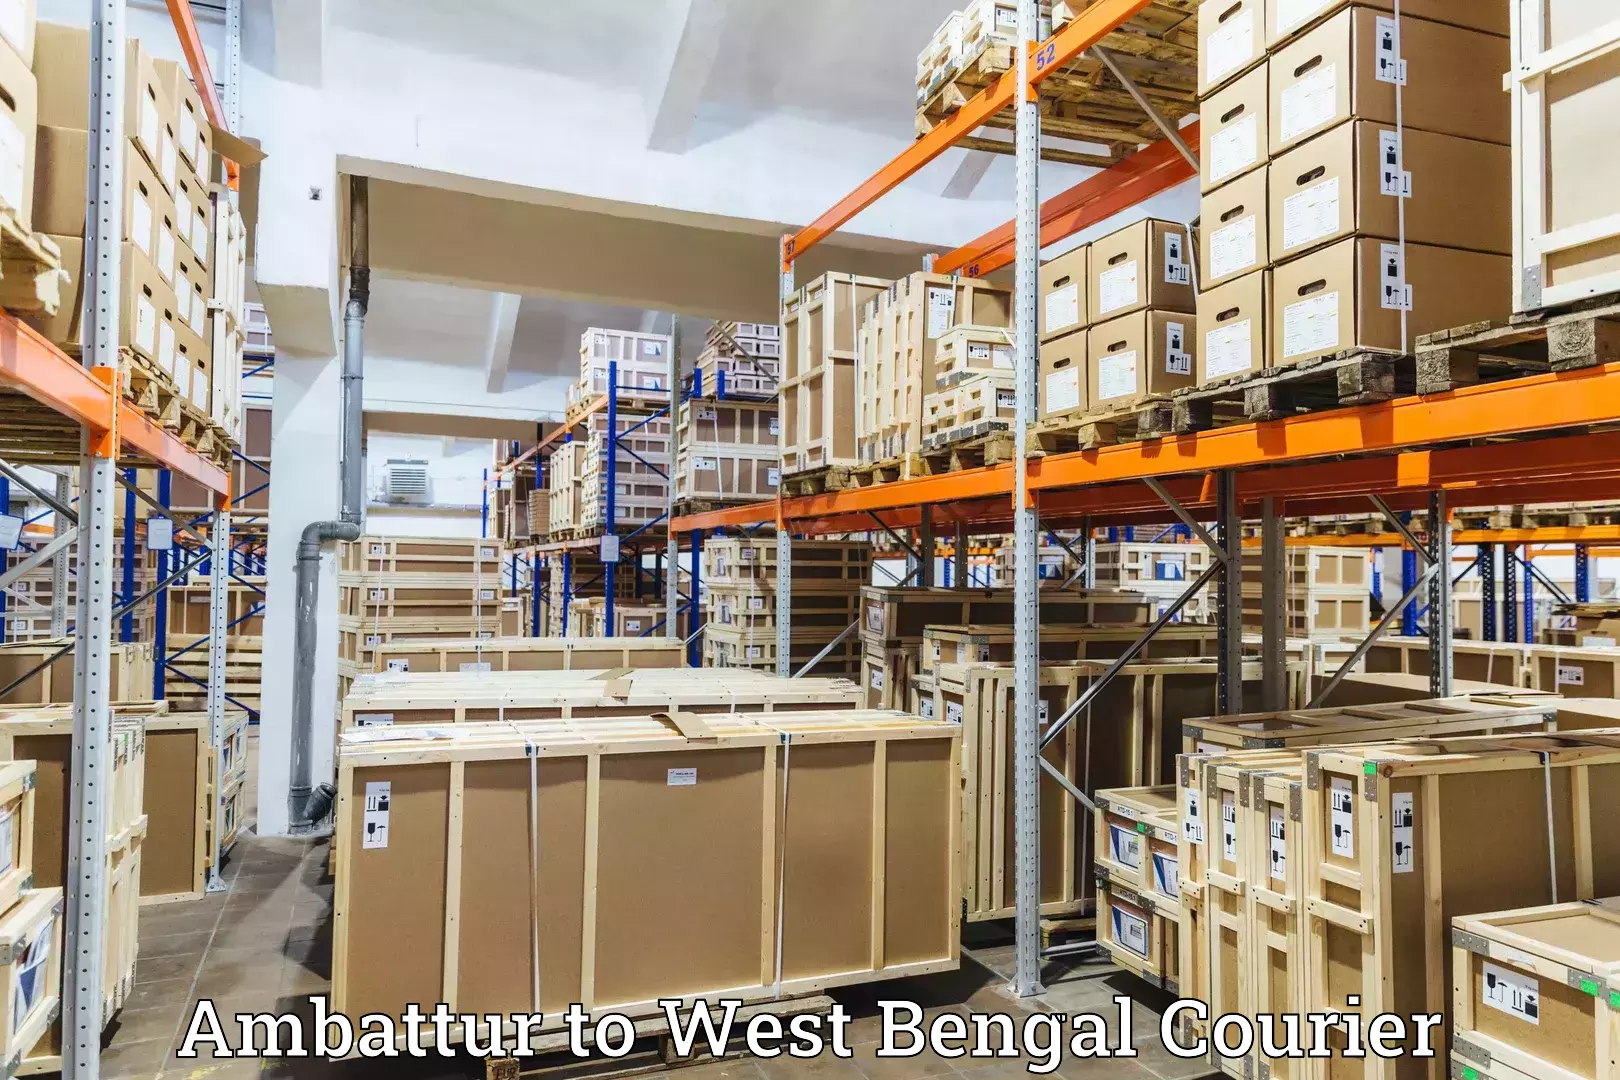 Delivery service partnership Ambattur to West Bengal